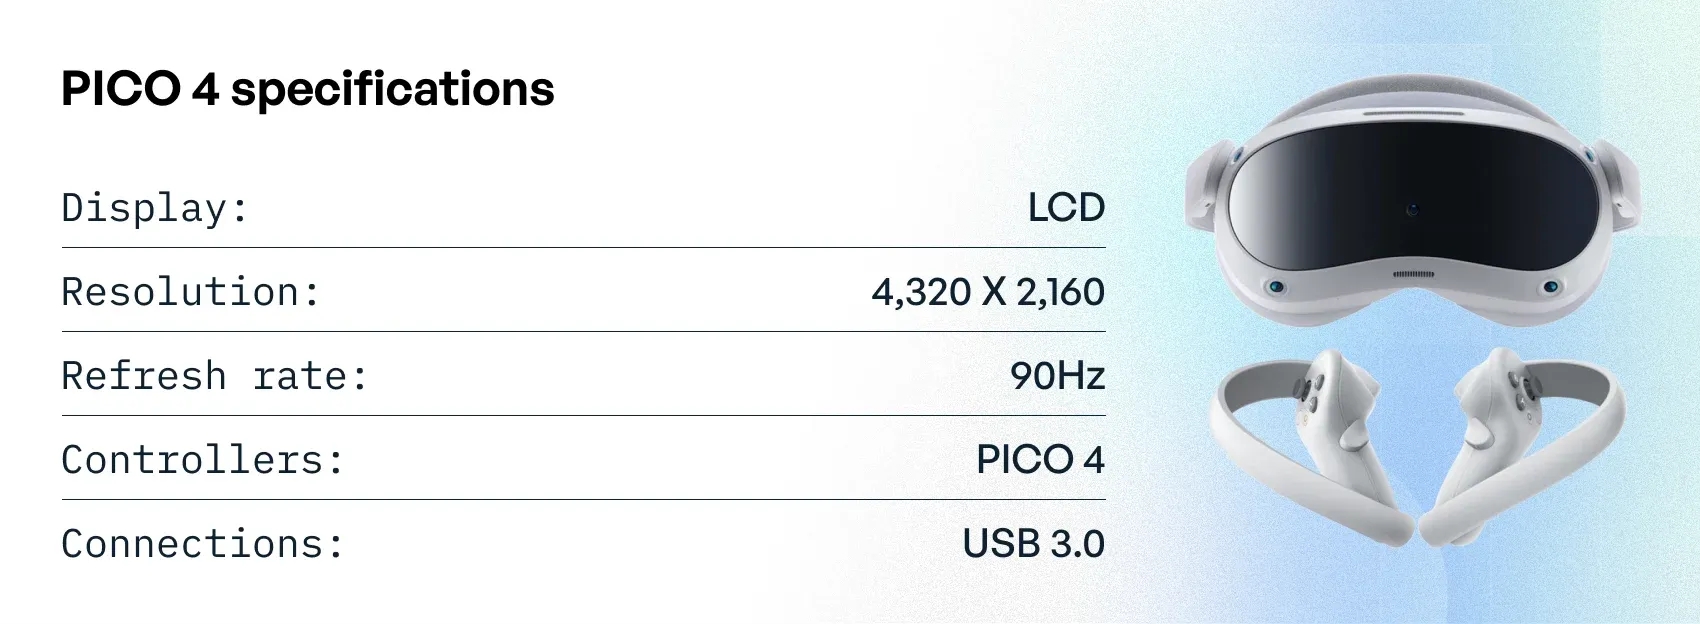 PICO 4 specifications